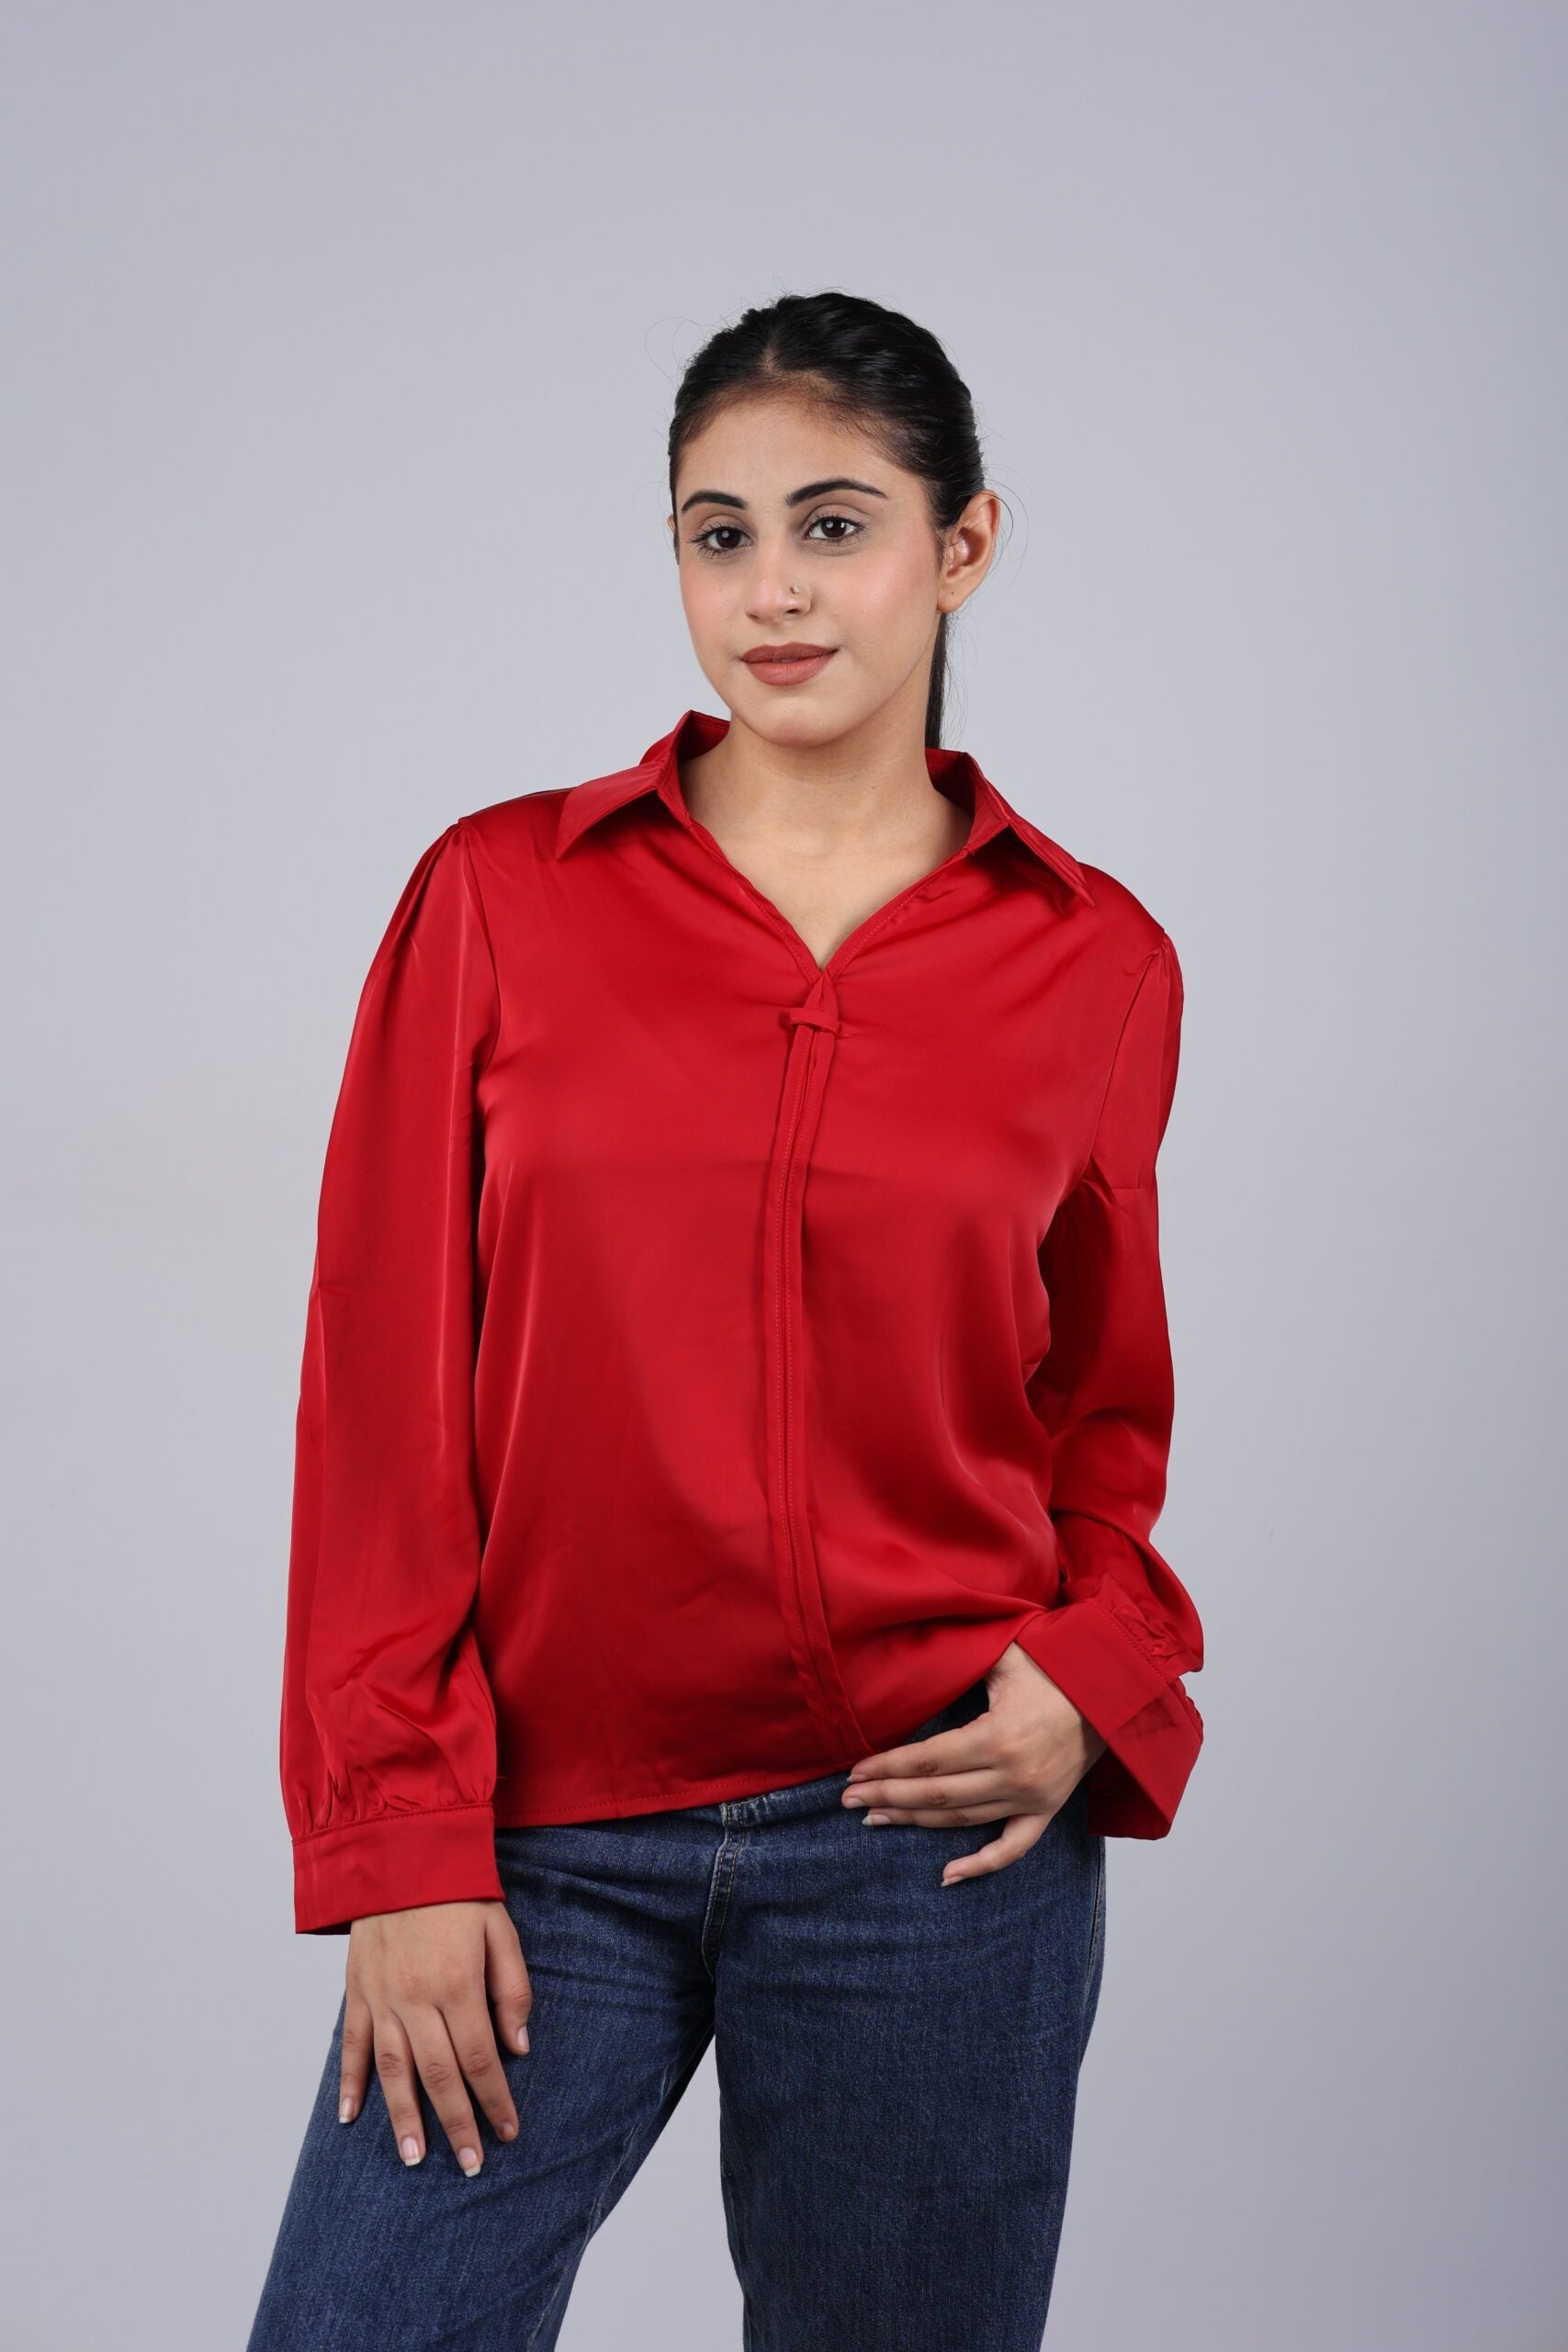 Red Satin Formal/Casual Top - A Luxurious Choice for Effortless Elegance!